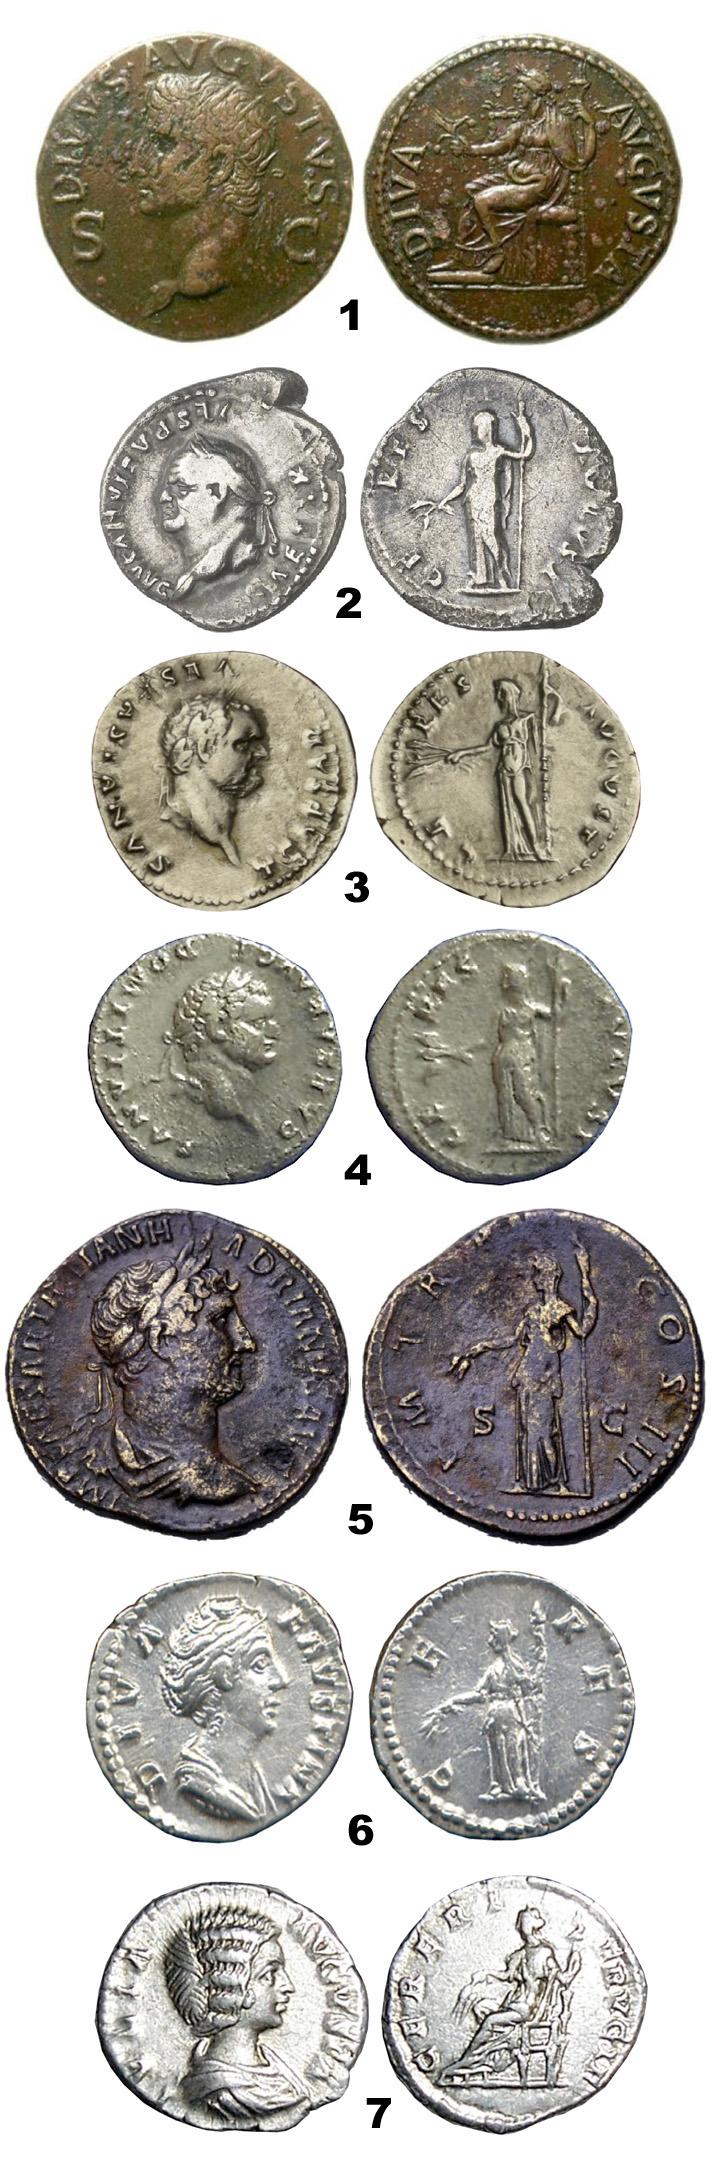 . Figure 2. GODDESS OF THE MYSTERIES OF ELEUSIS on coins of Roman emperors: 1. Dupondius of Claudius with Divus Augustus on the obverse, his wife Julia as Ceres on the reverse. 2. Denarius of Vespasian with Ceres on the reverse.